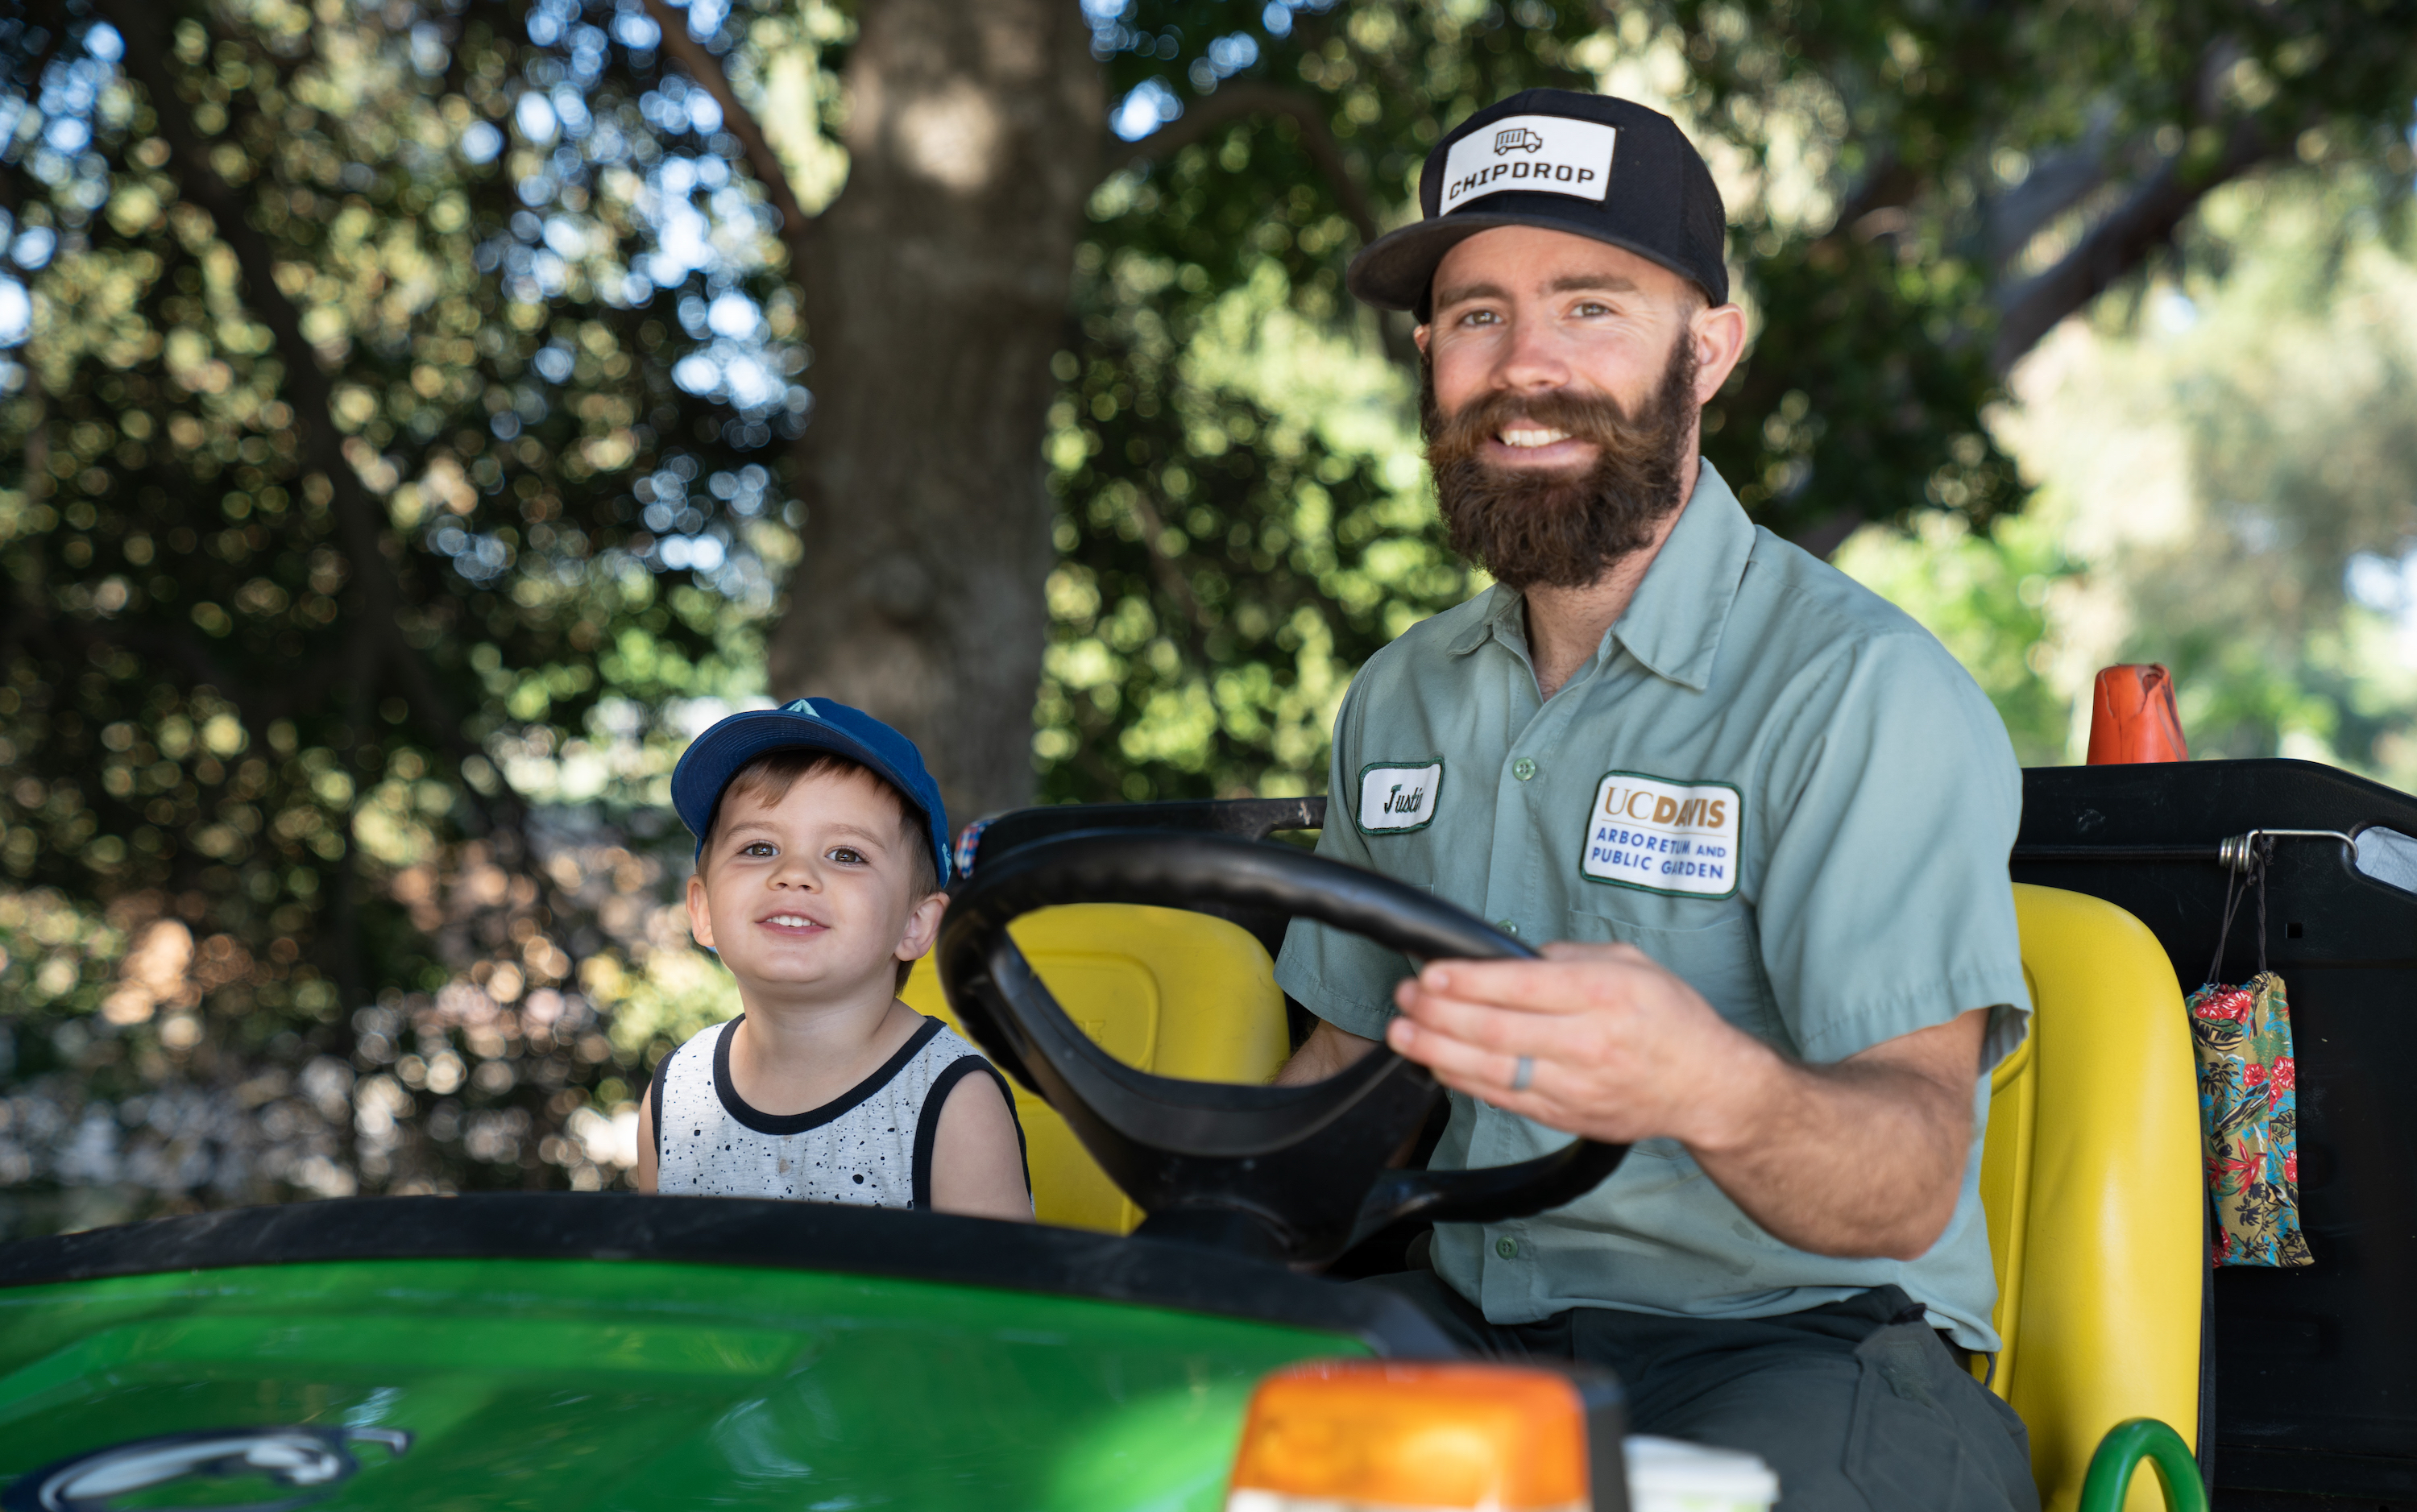 Employee driving tractor with young child beside him